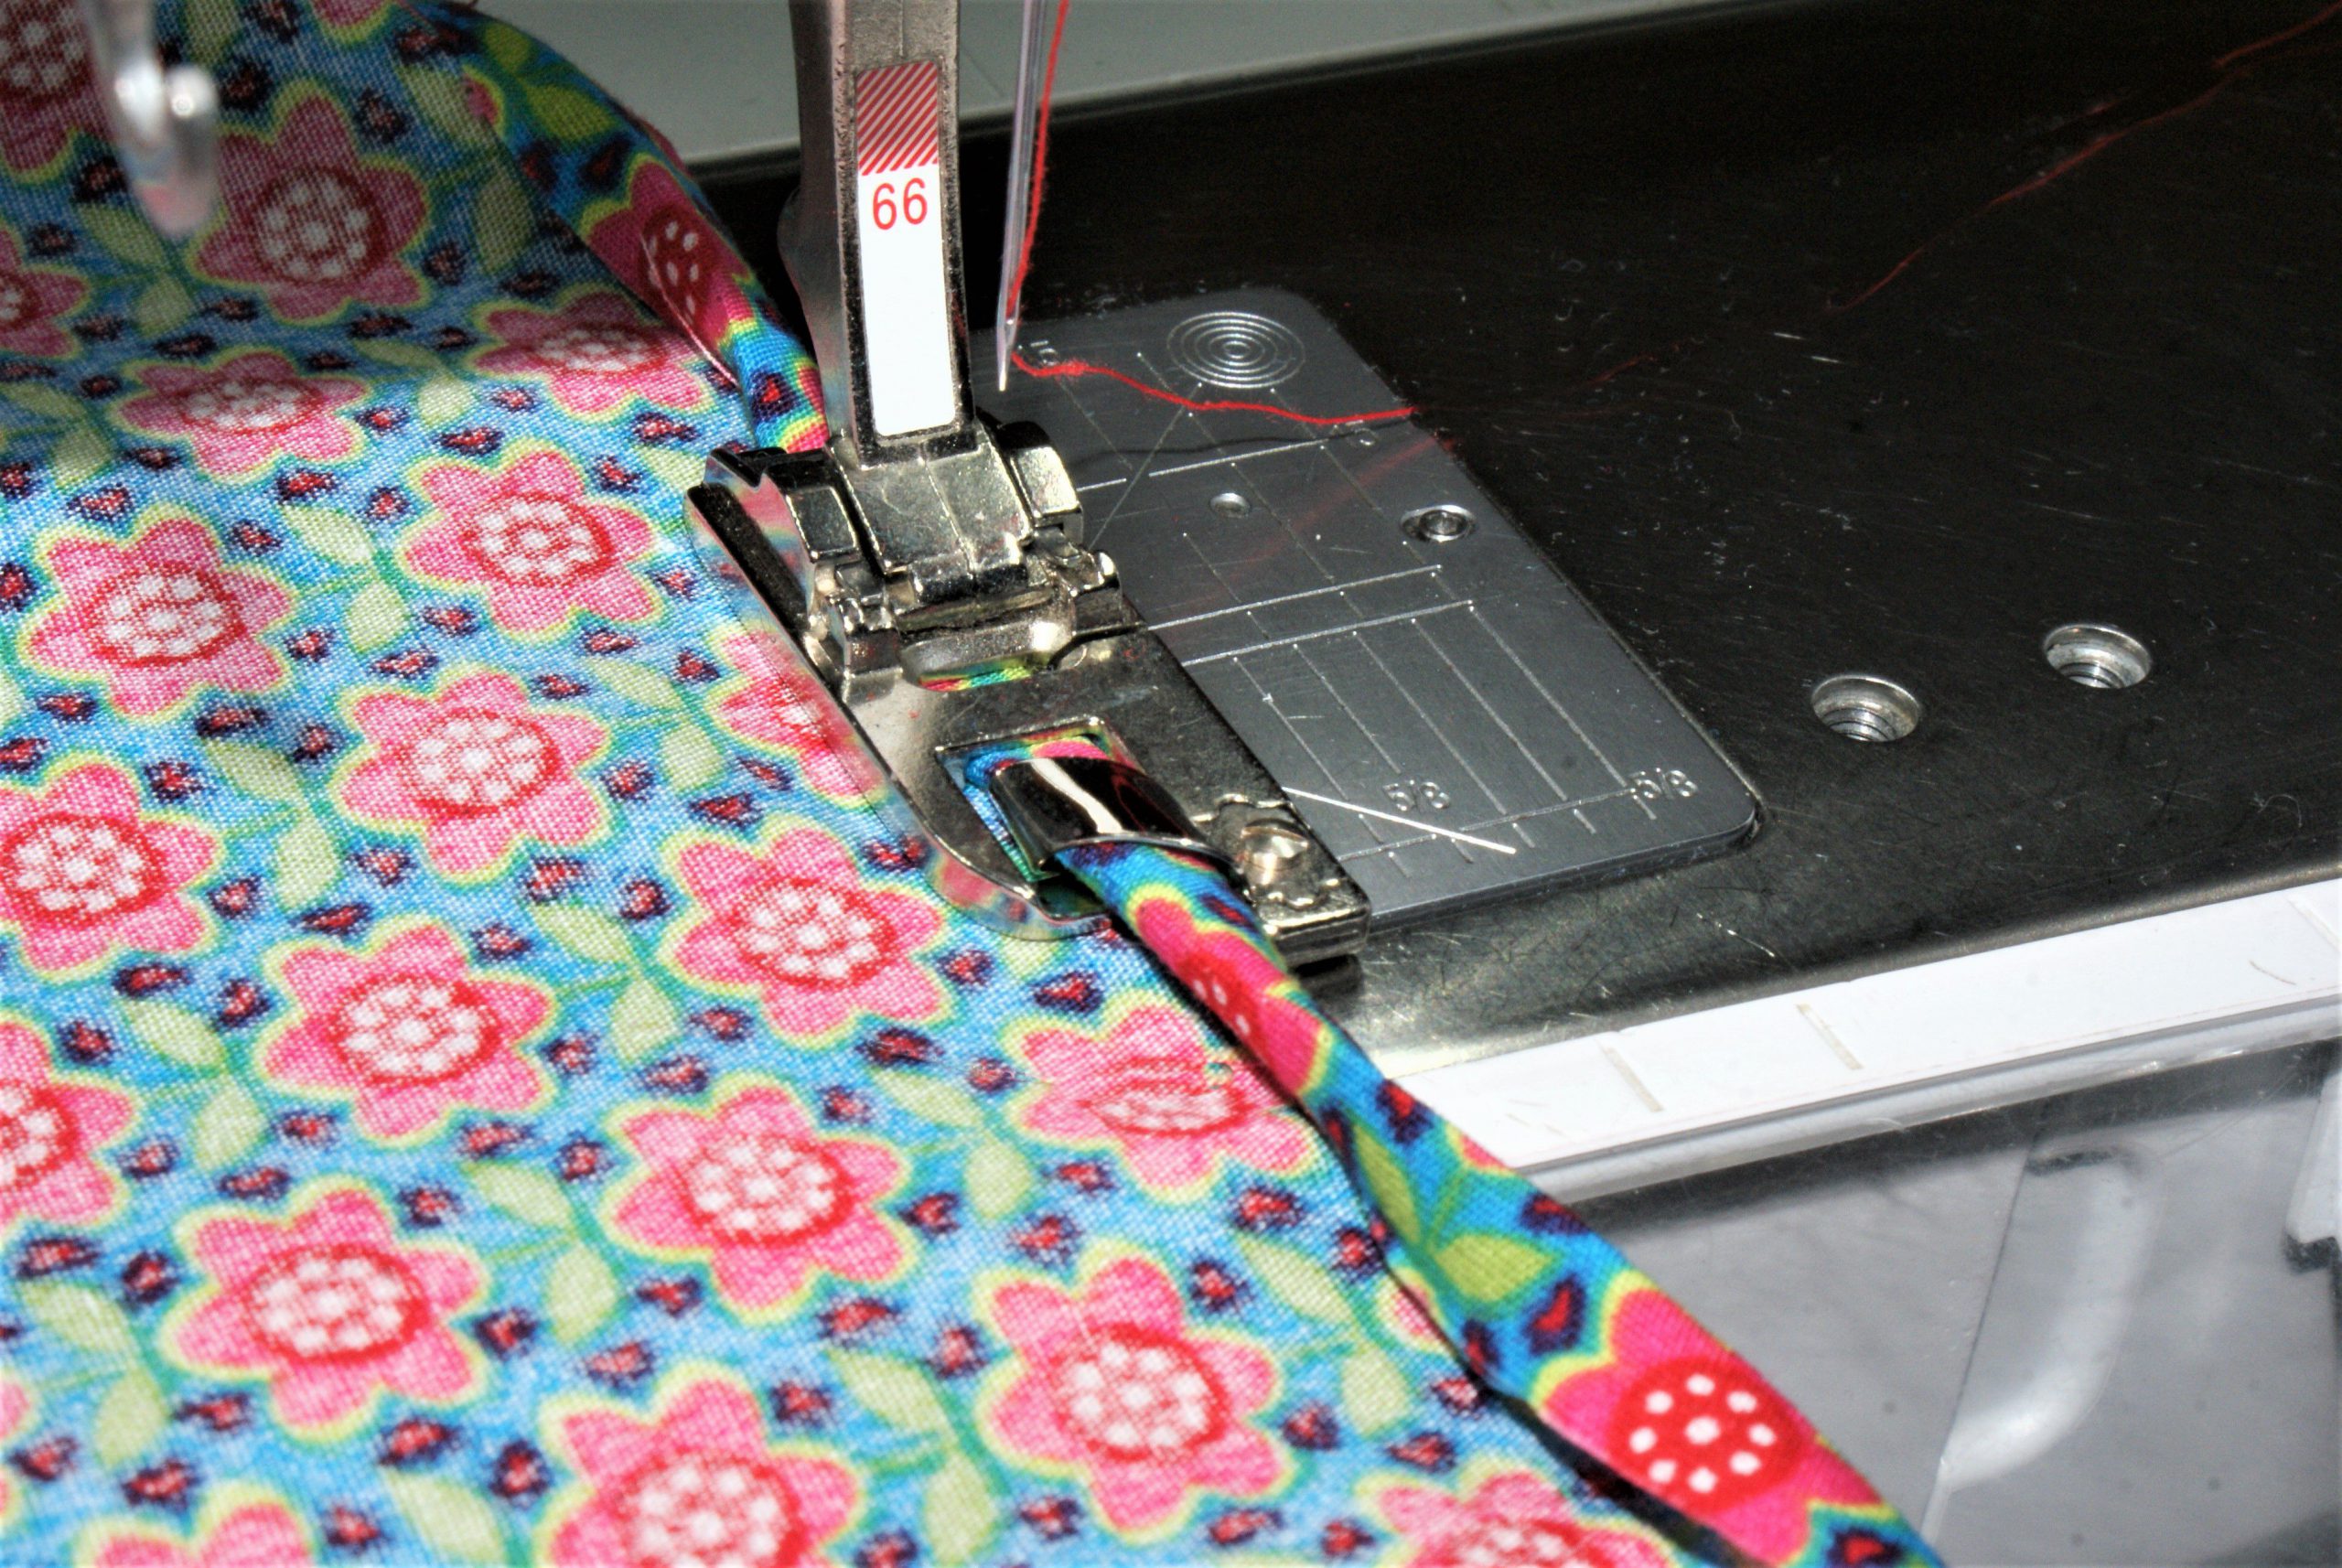 Sew an infinity scarf with neat hems with hemmer foot 66 Bernina